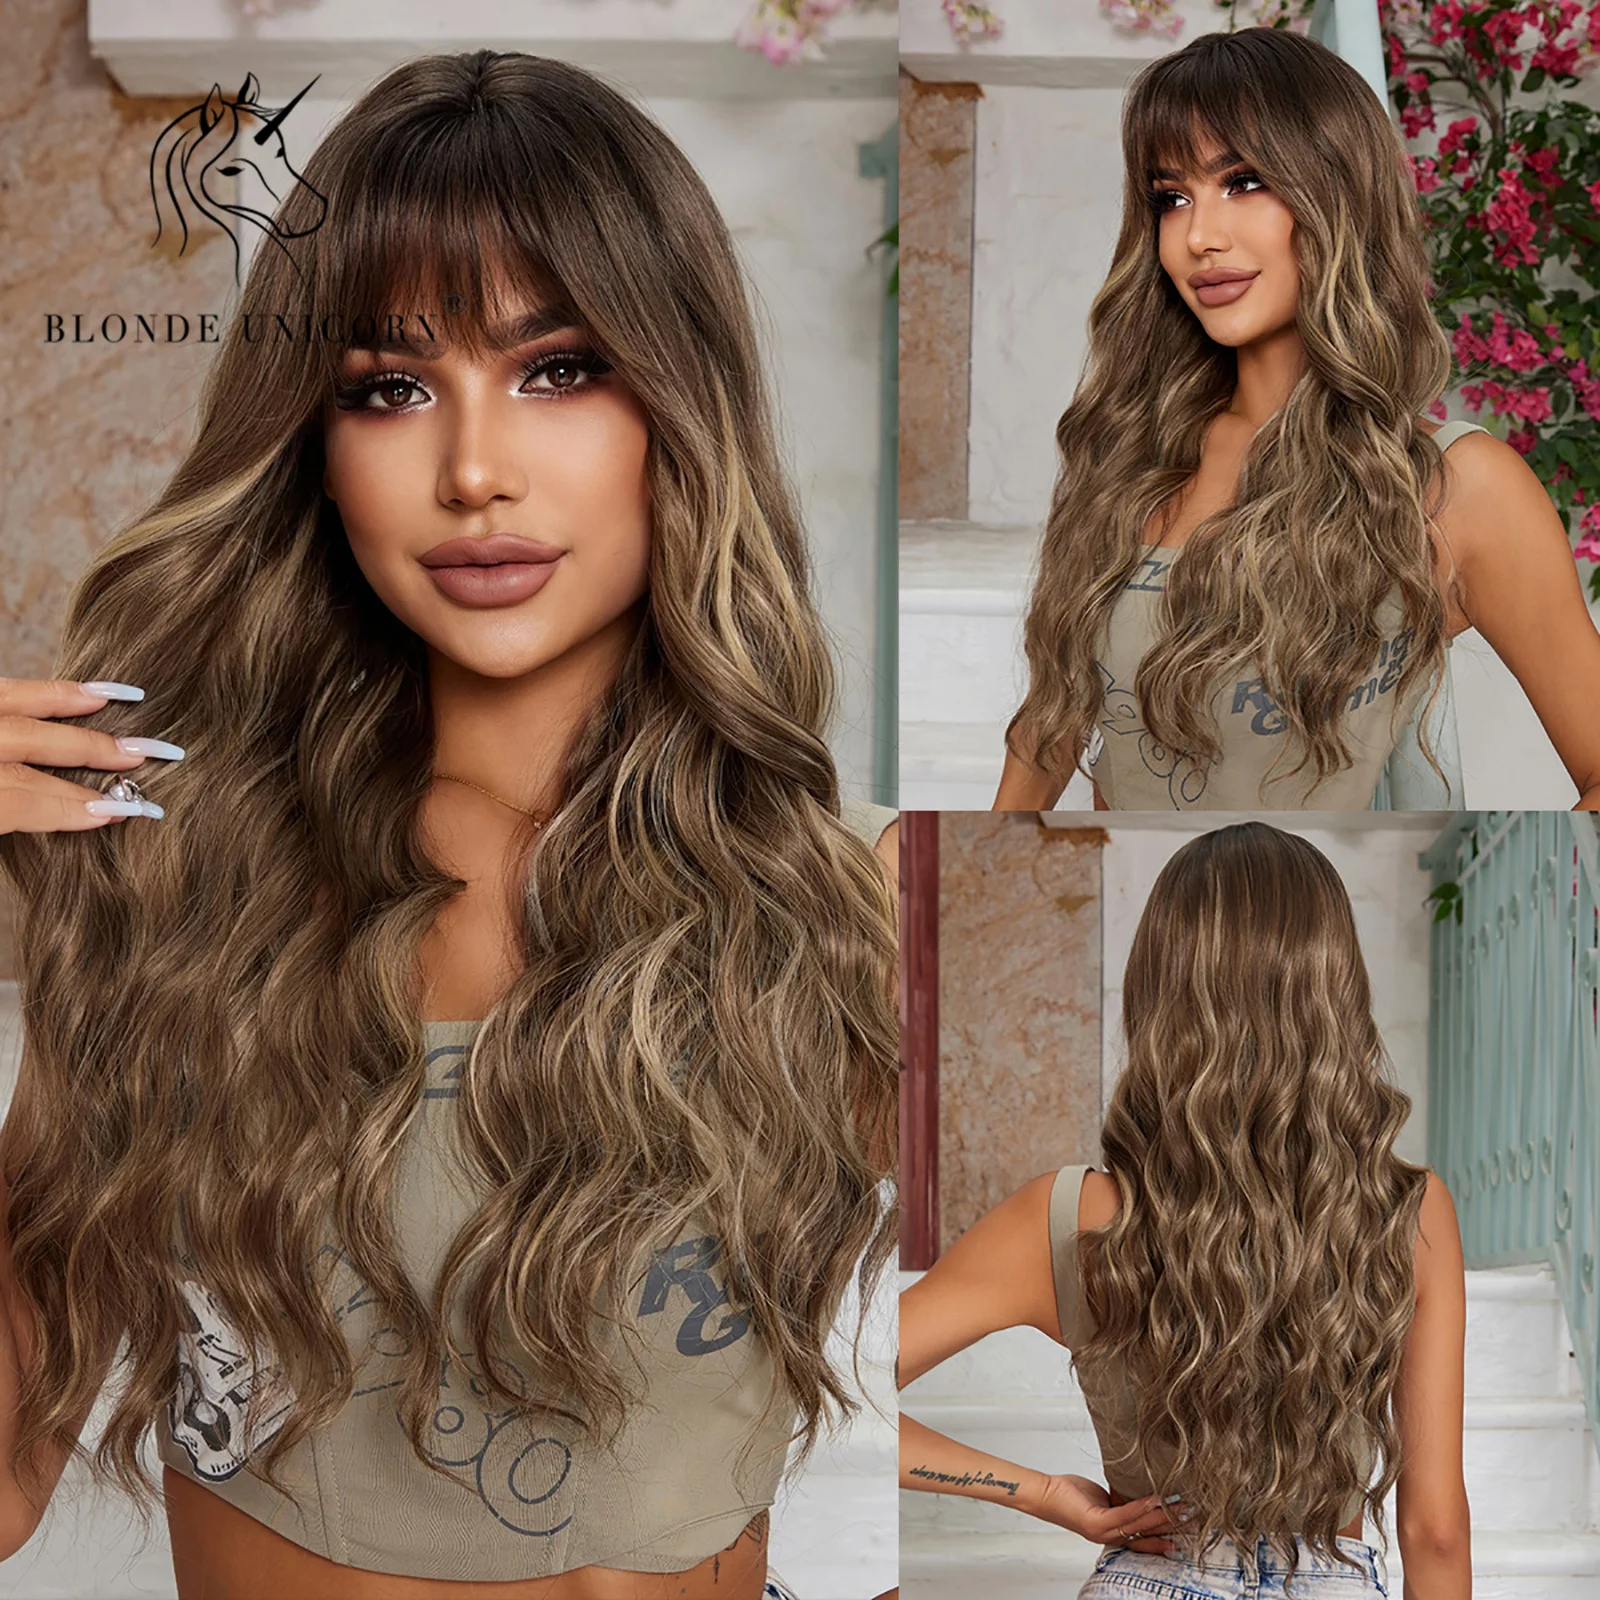 

Blonde Unicorn Synthetic Mixed Brown Blonde Wig Long Wavy Wigs with Bangs Daily Cosplay Party Use Heat Resistant Fiber for Women